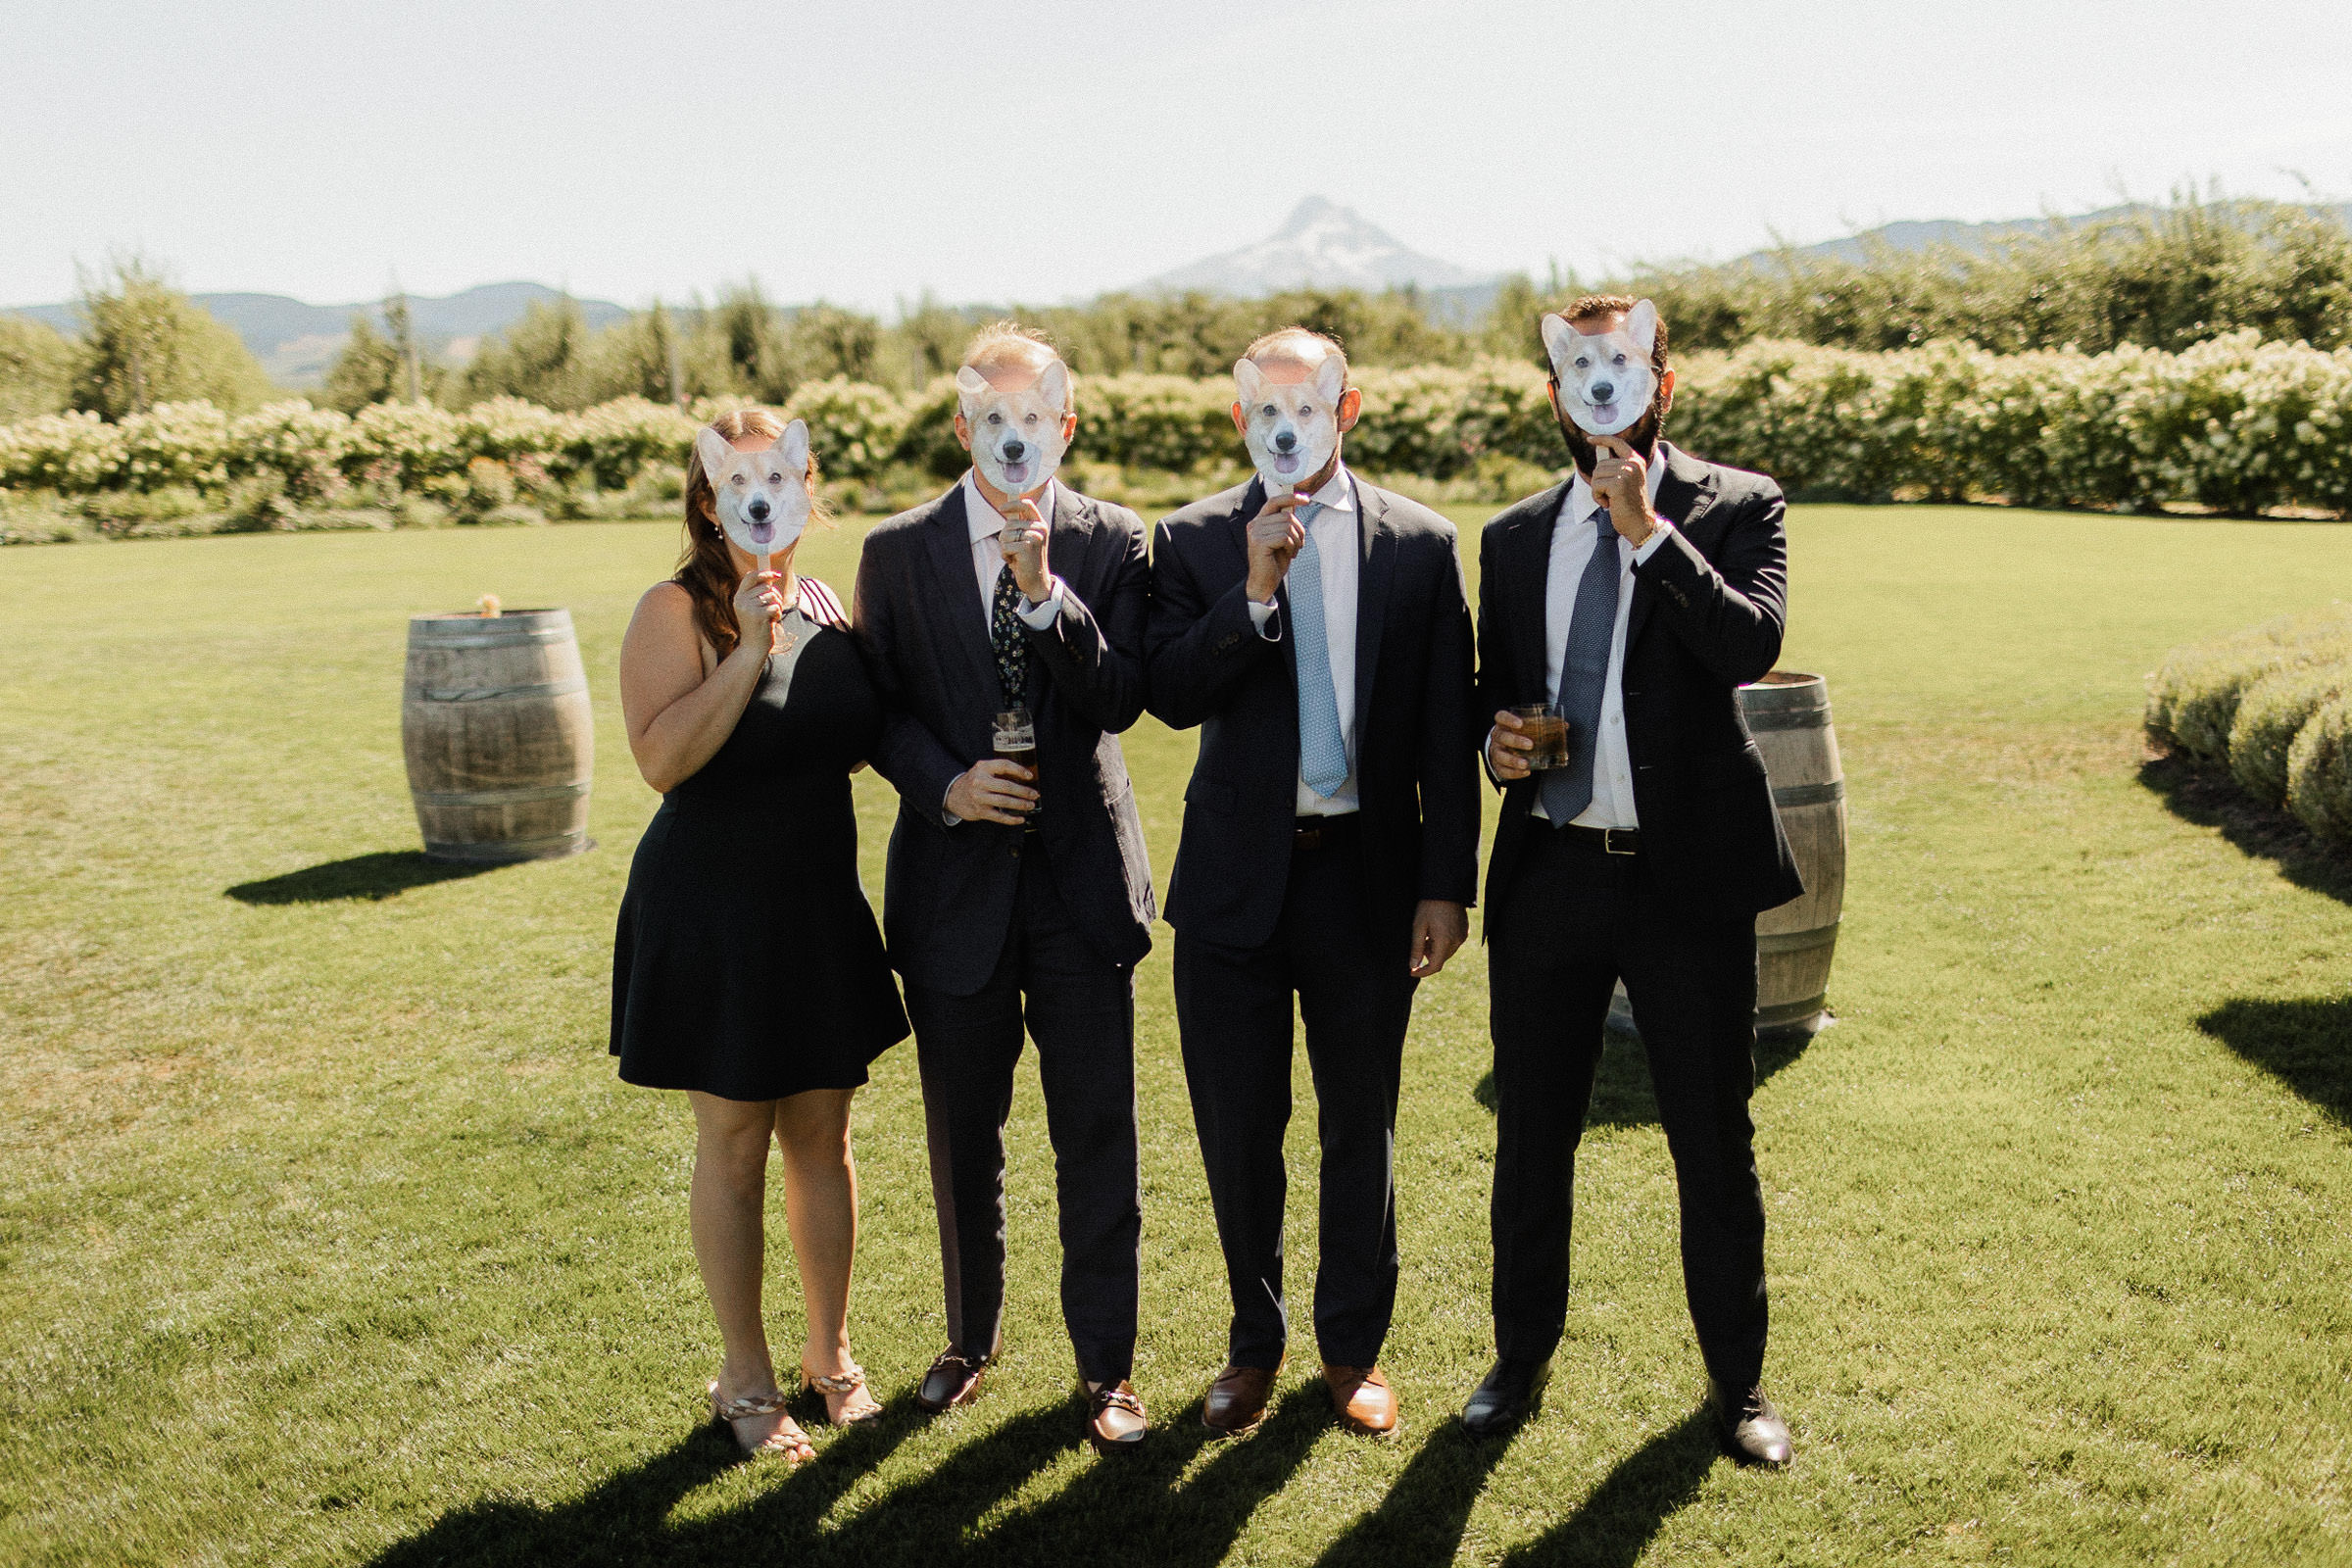 Wedding guests pose using hand fans depicting a corgi face as masks